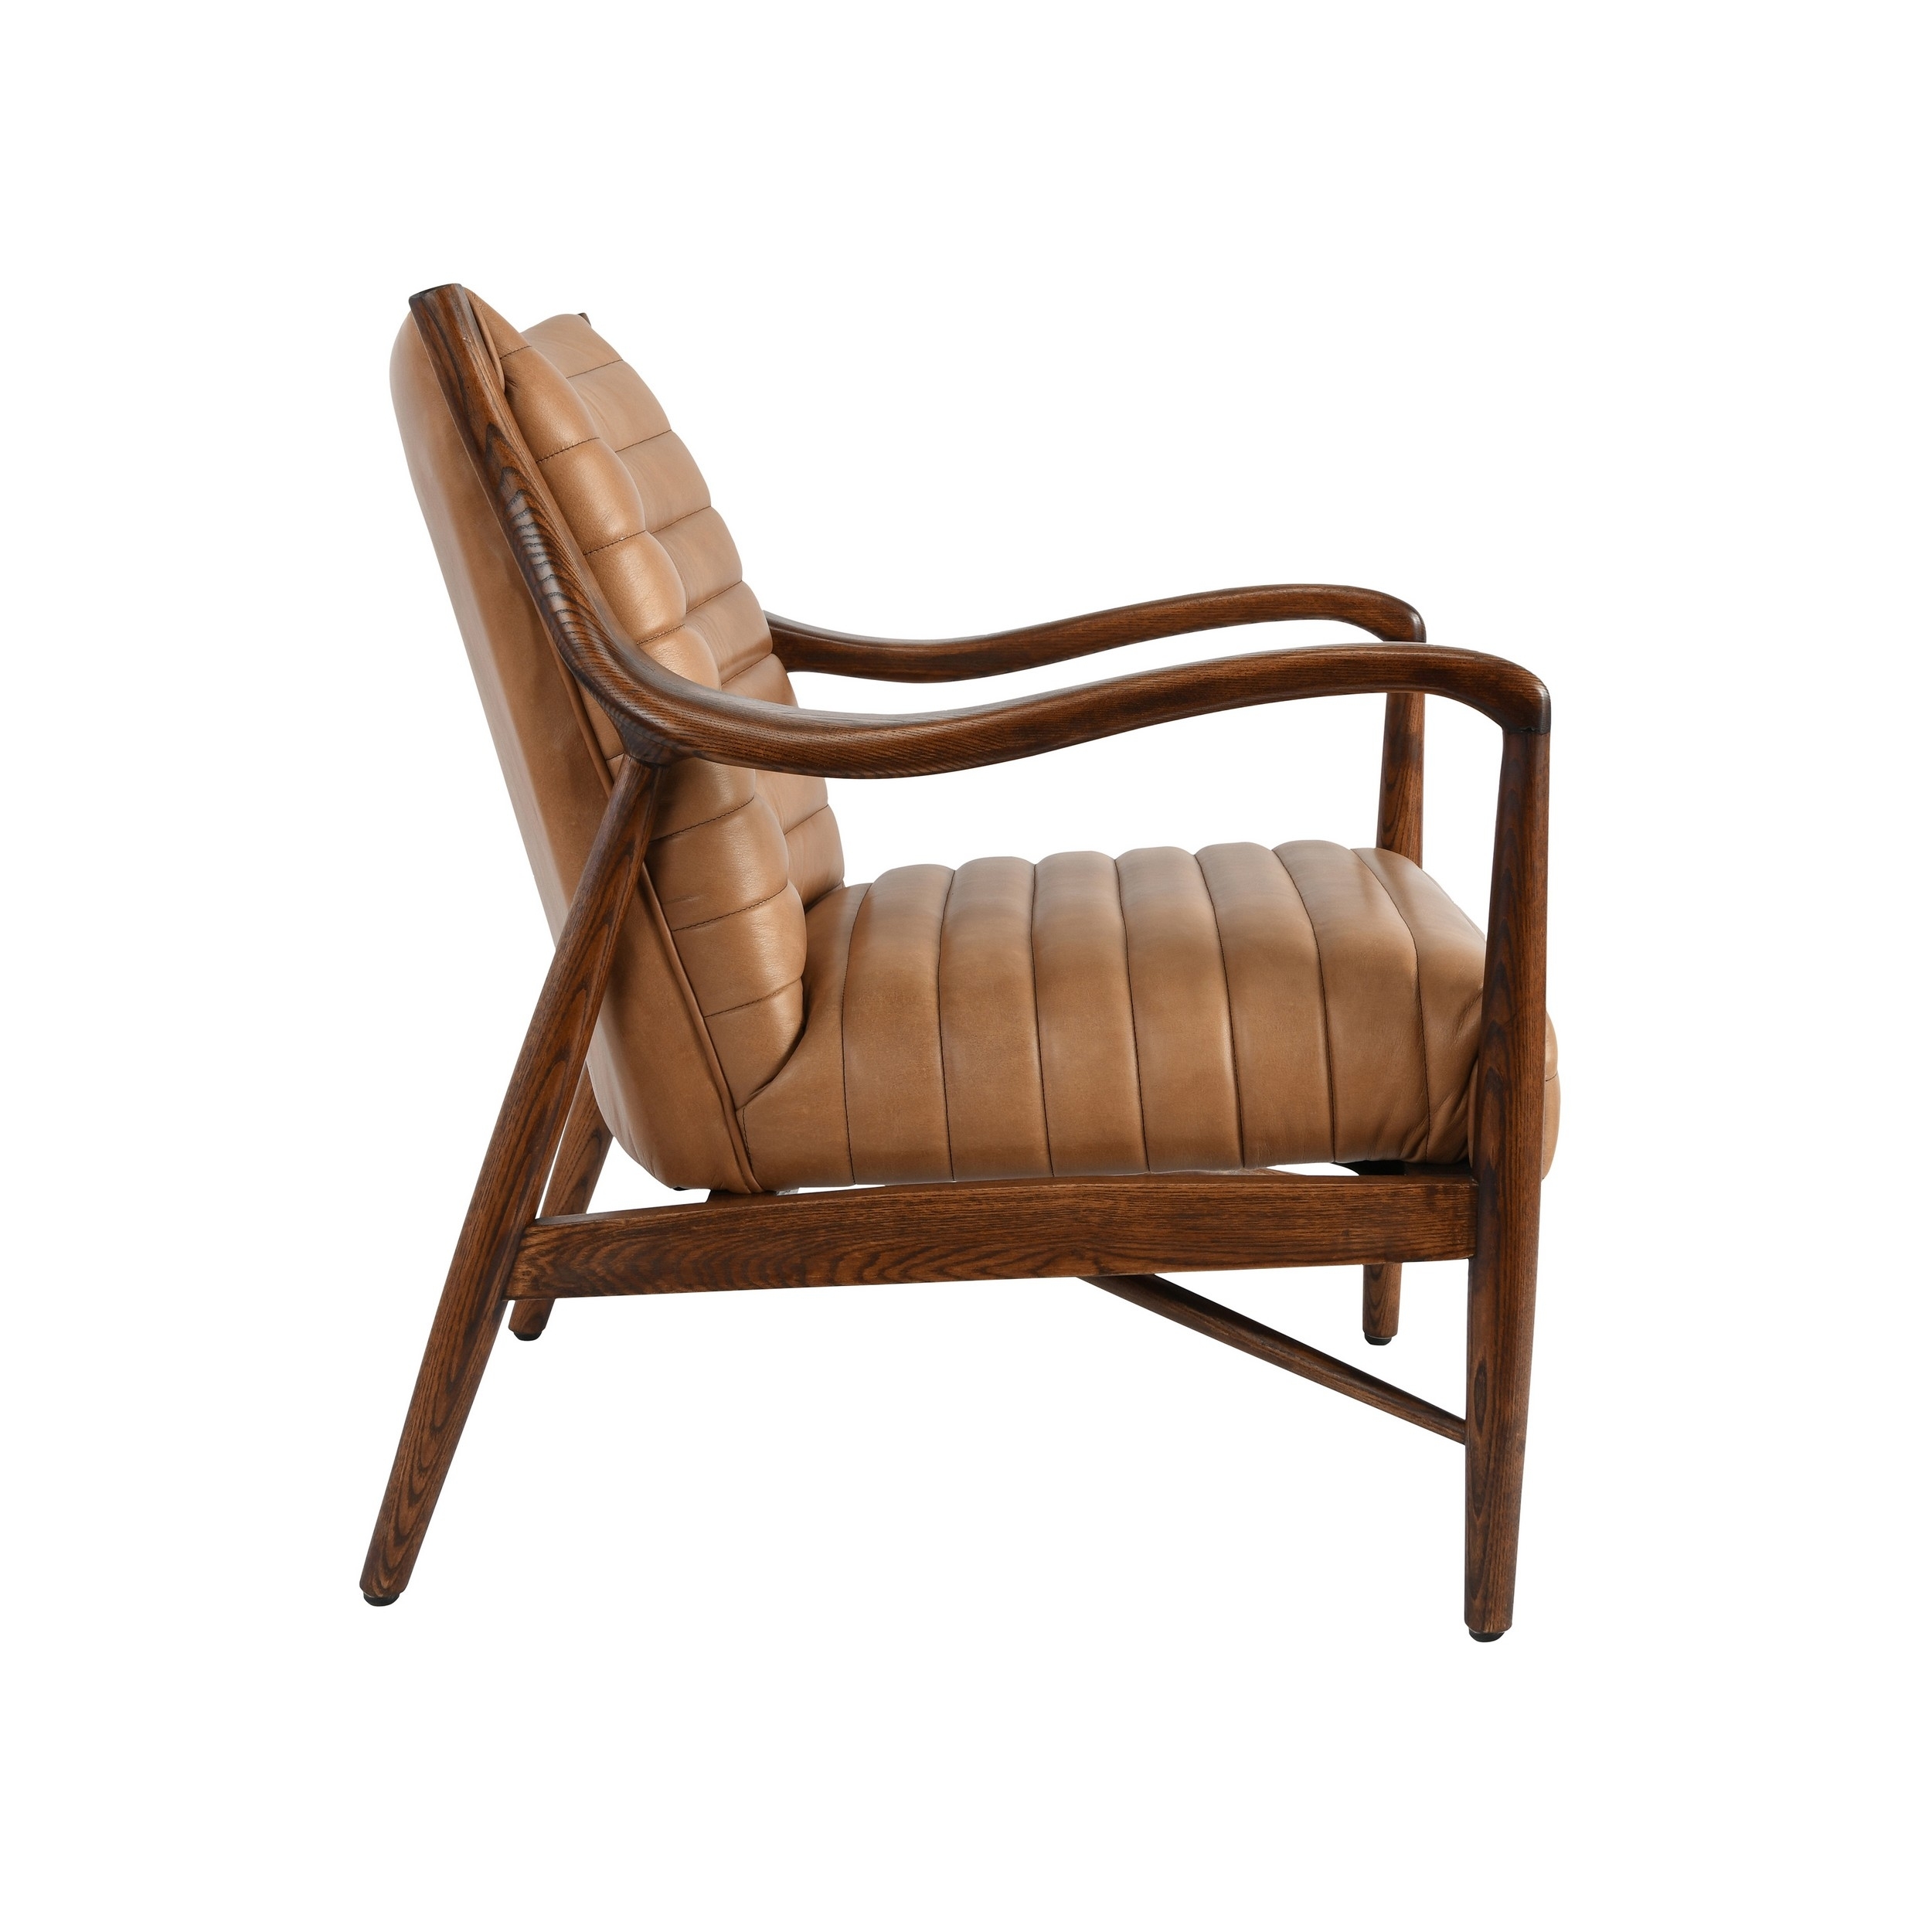 30 Inch Club Chair, Channel Stitching, Genuine Leather Upholstery, Brown -Saltoro Sherpi